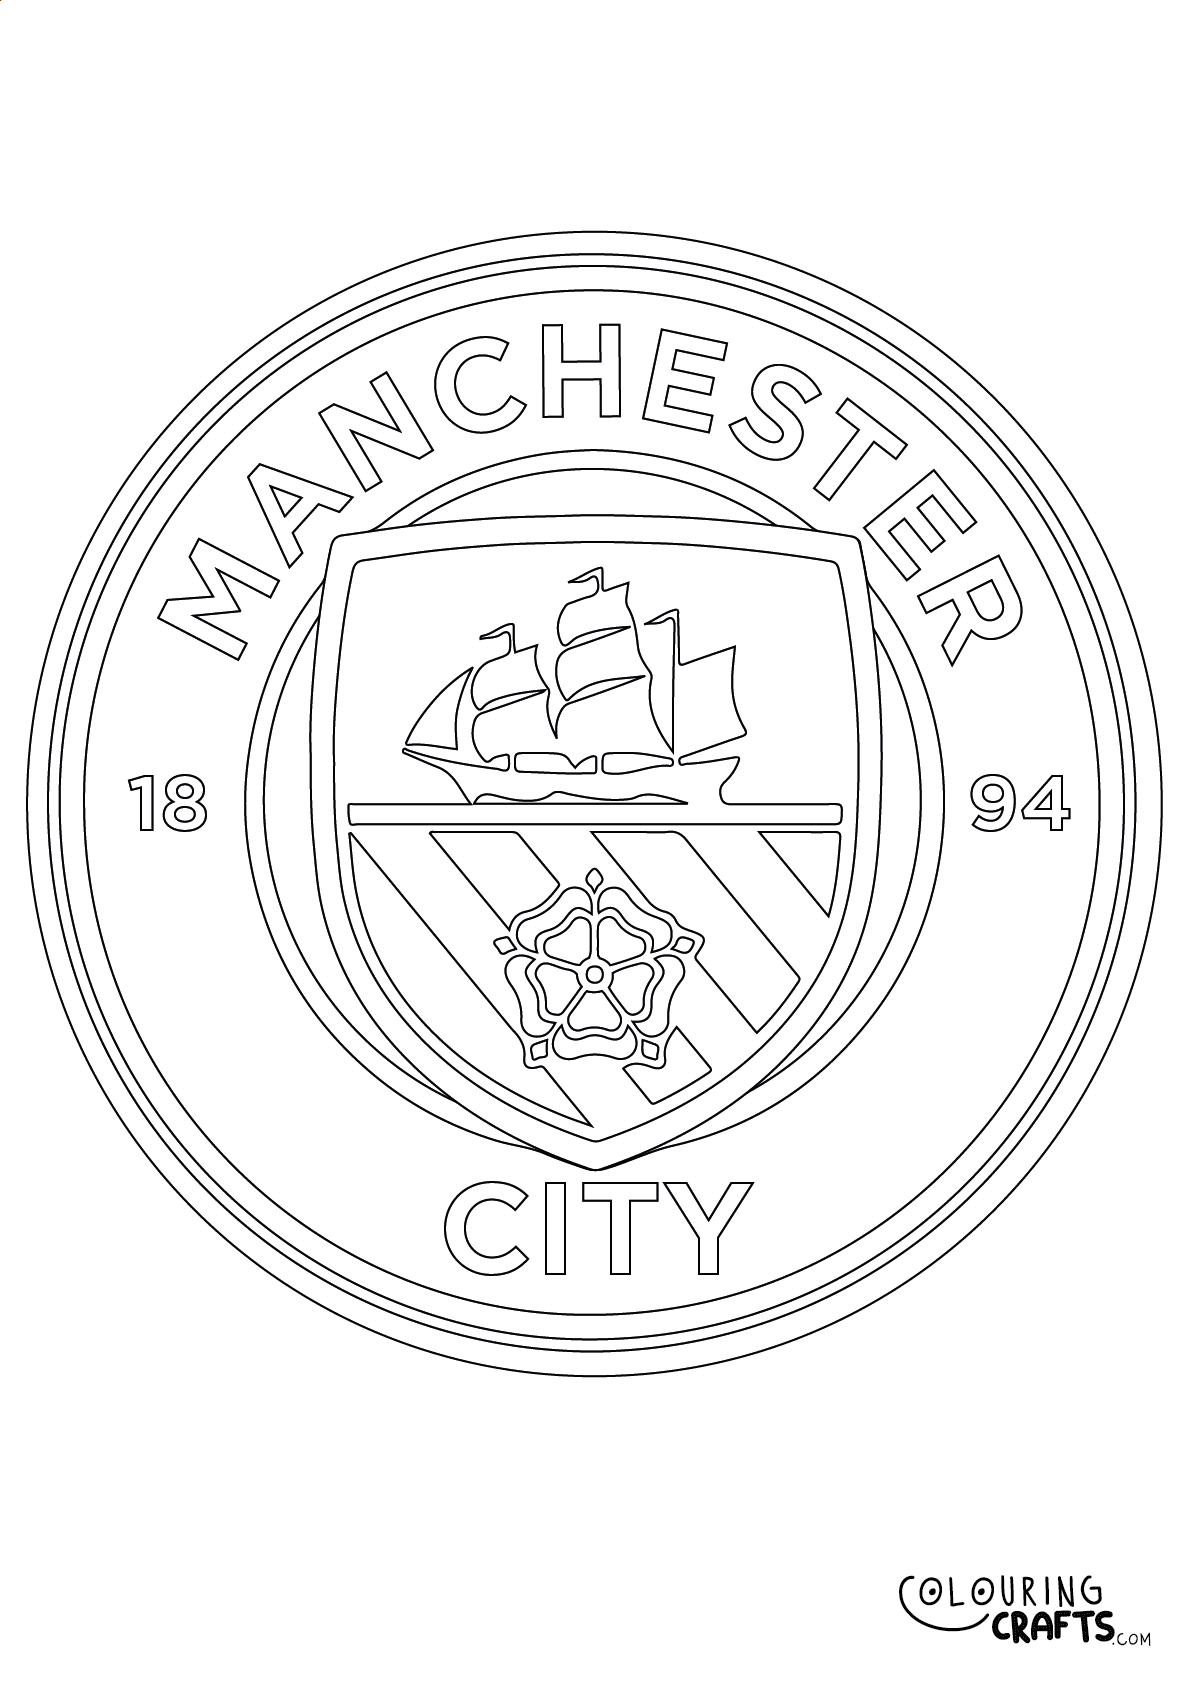 Manchester City Badge Printable Colouring Page - Colouring Crafts